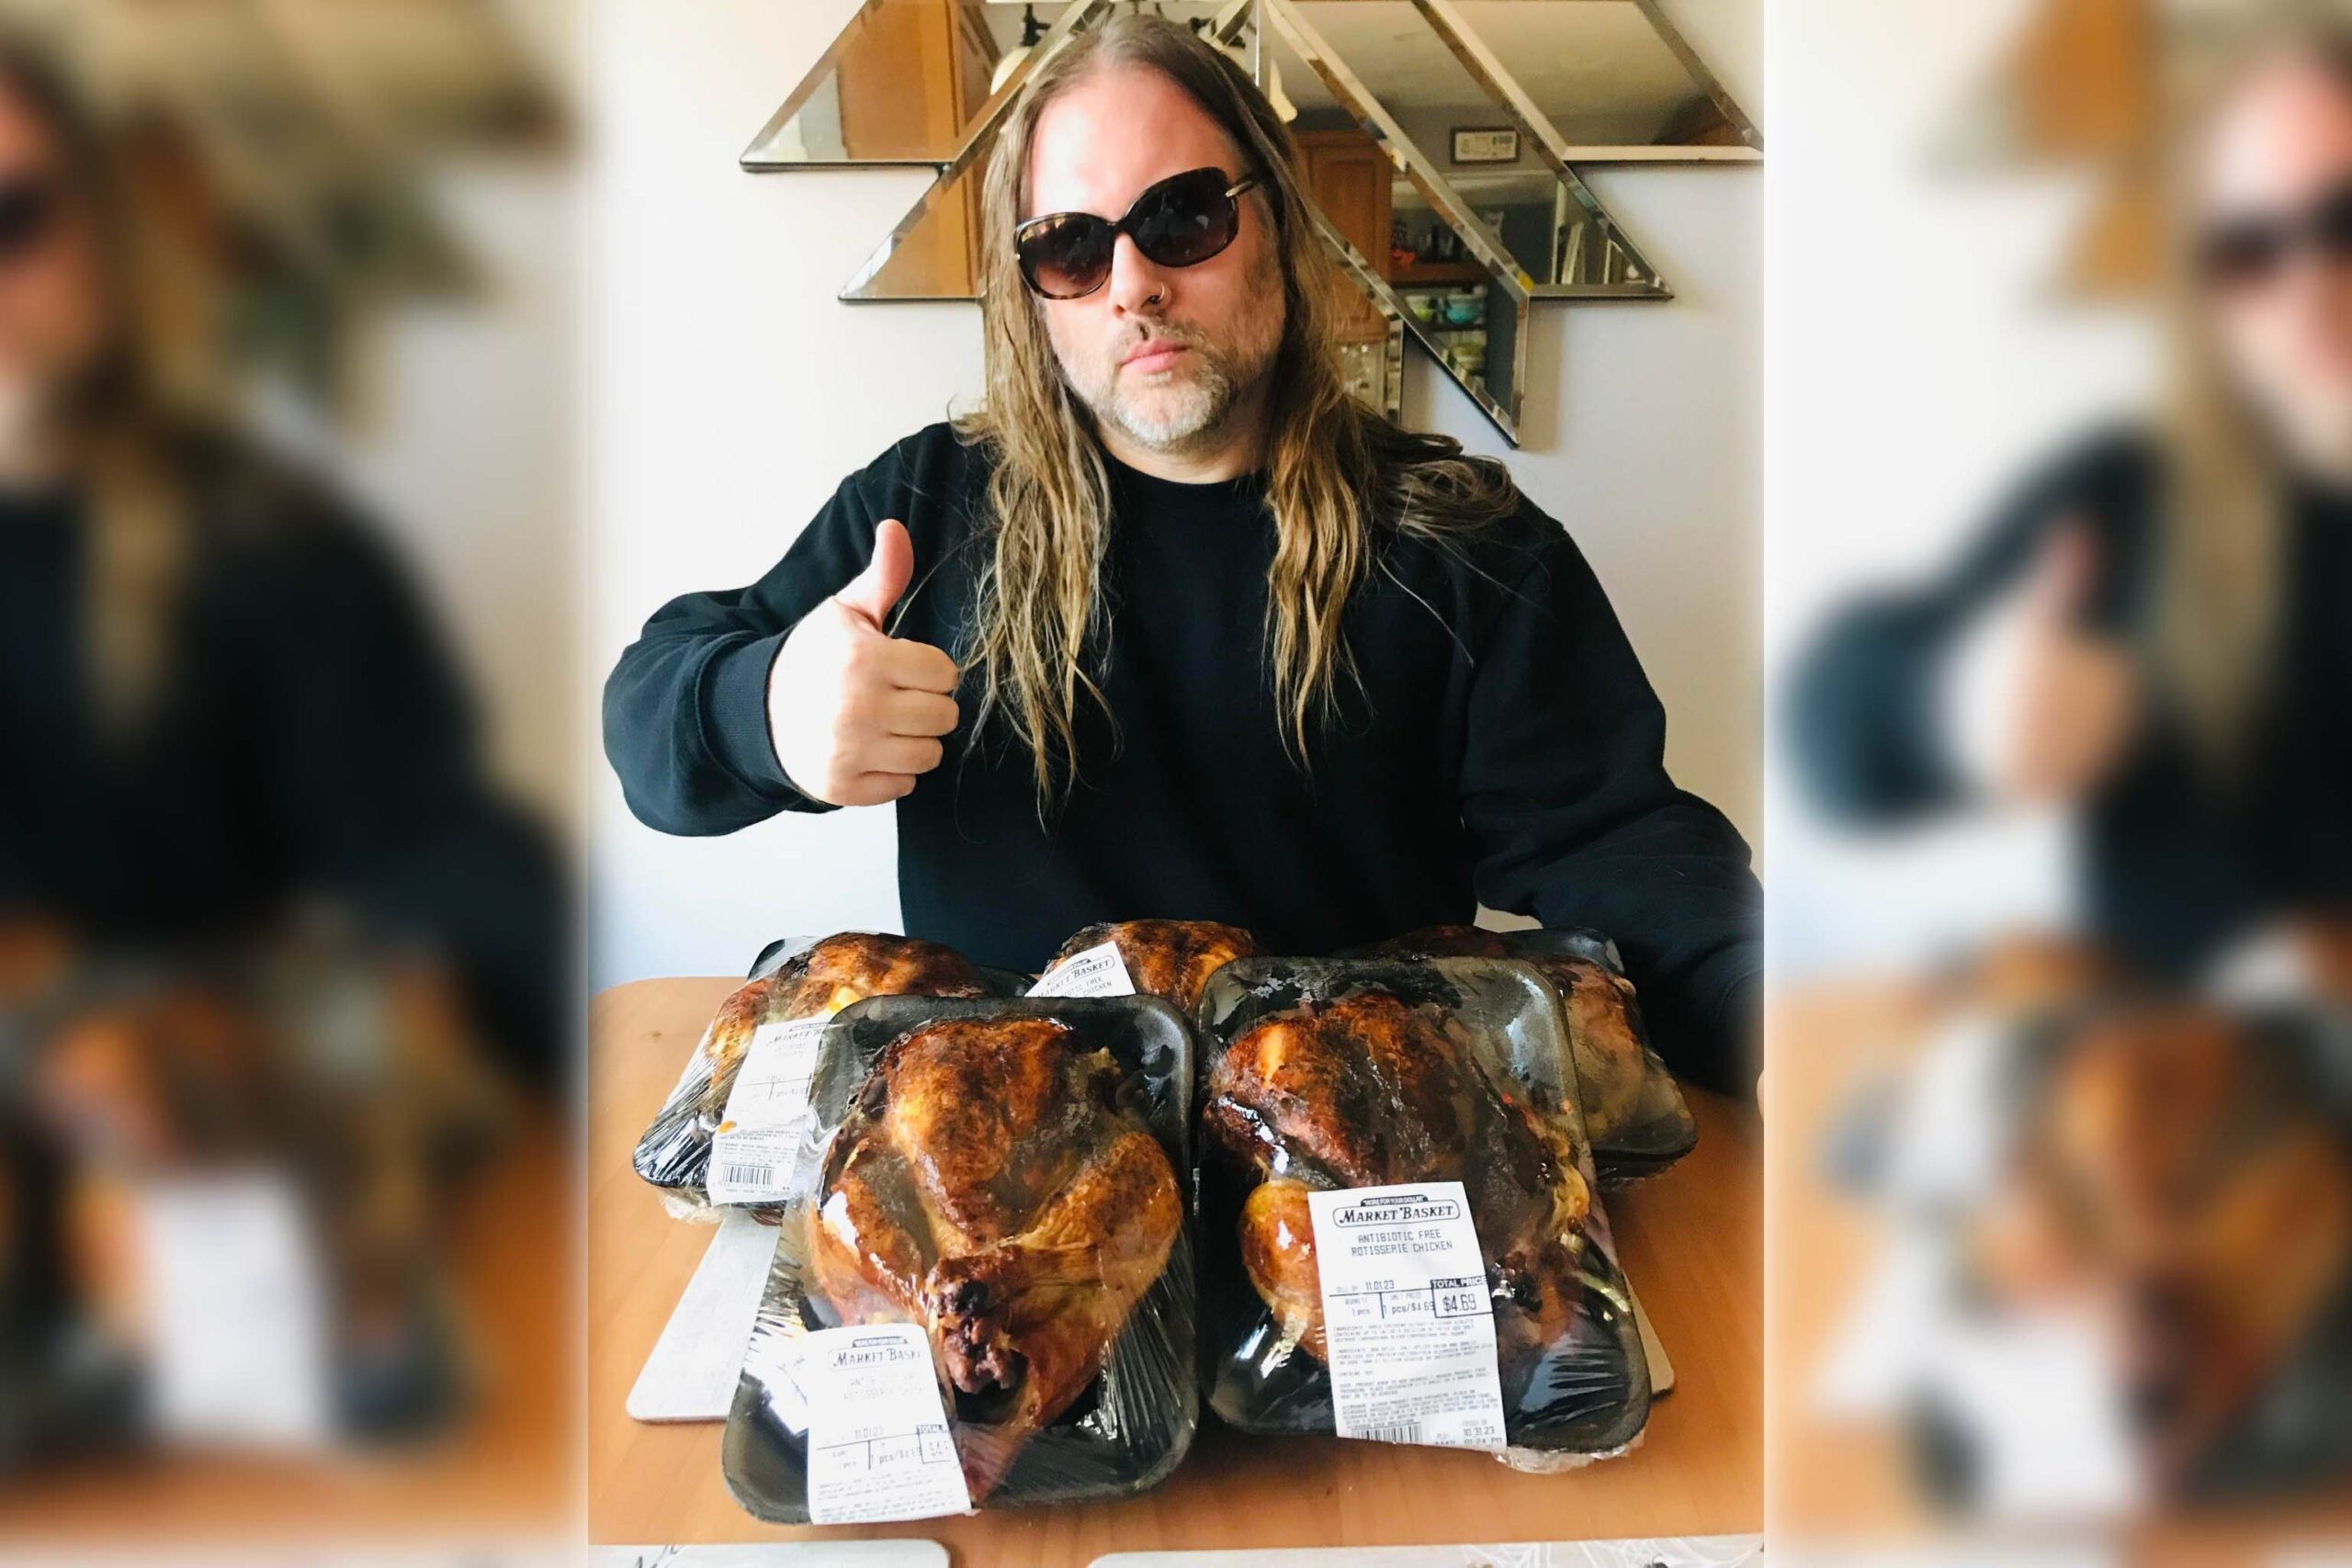 Michael O’Connor Marotta displays a thumbs up with his Market Basket rotisserie chickens.